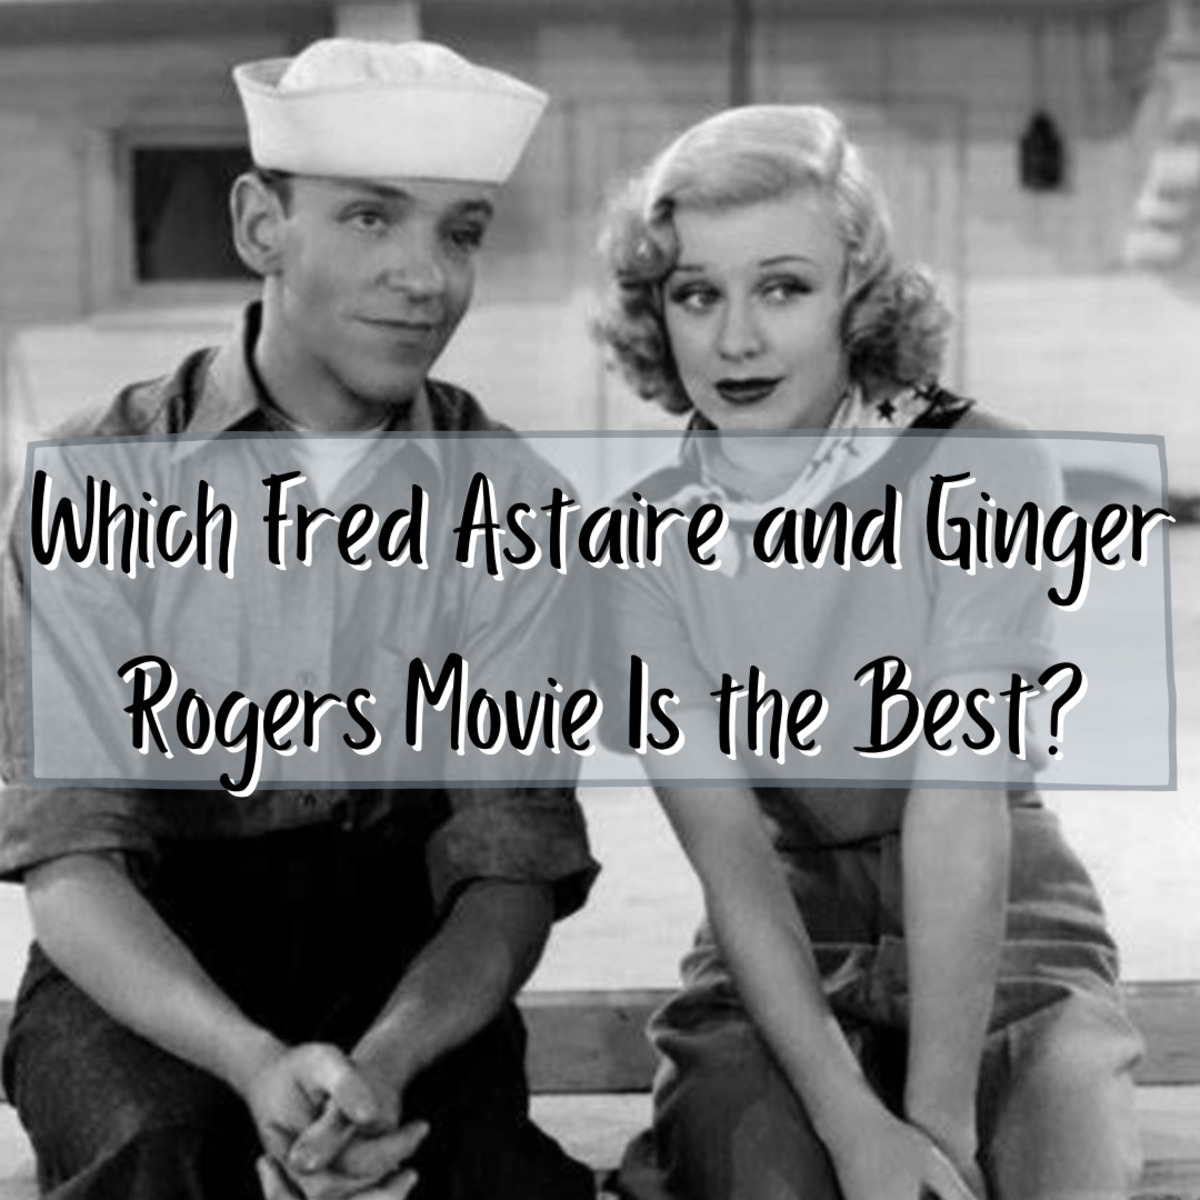 Top 10 Fred Astaire and Ginger Rogers Movies